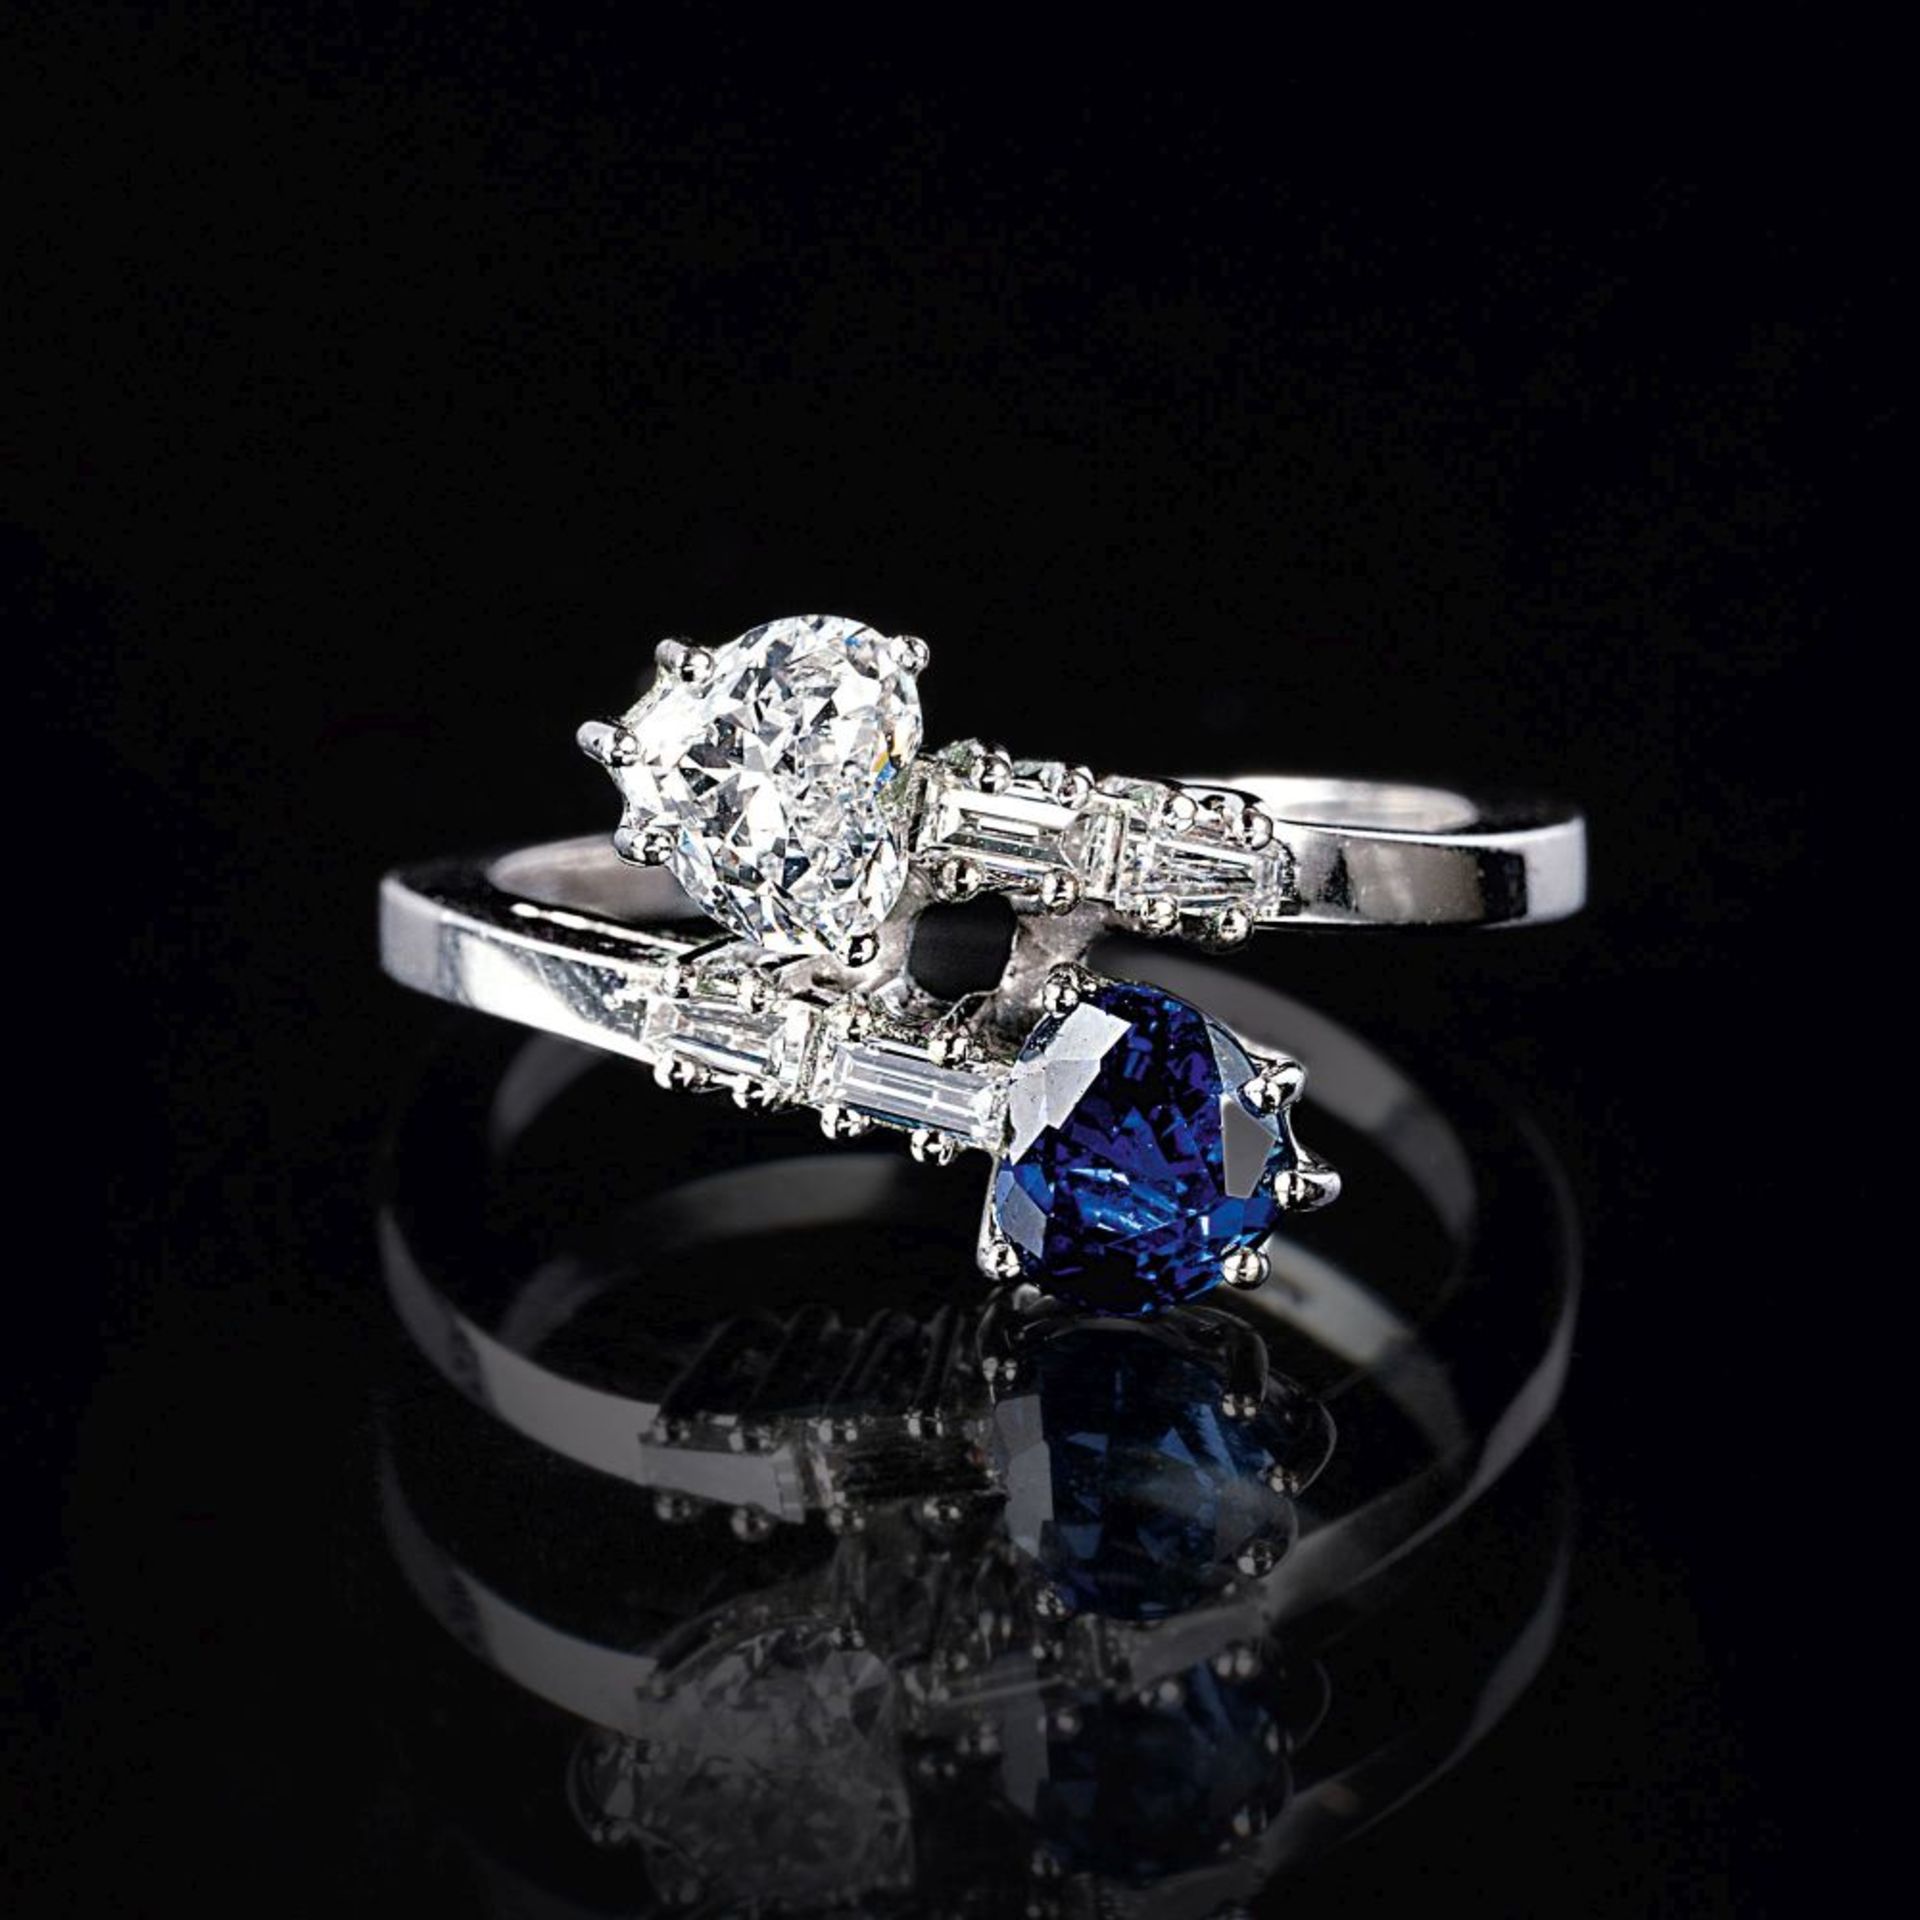 A Toi-et-Moi Ring with Hearts of Sapphire and Diamond.